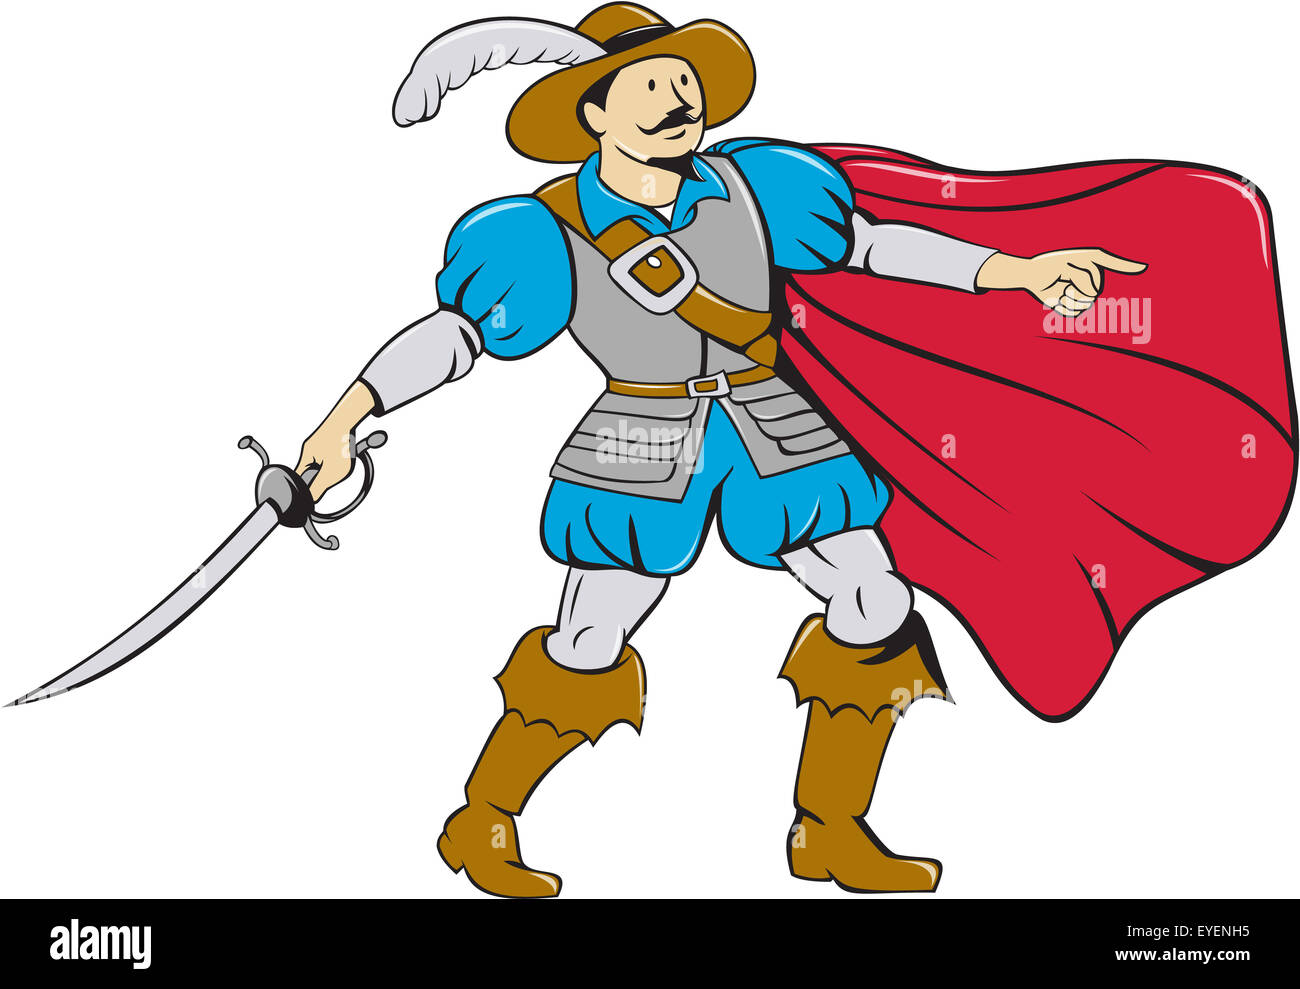 Cartoon style illustration of a musketeer wearing cape holding saber pointing viewed from front on isolated white background. Stock Photo